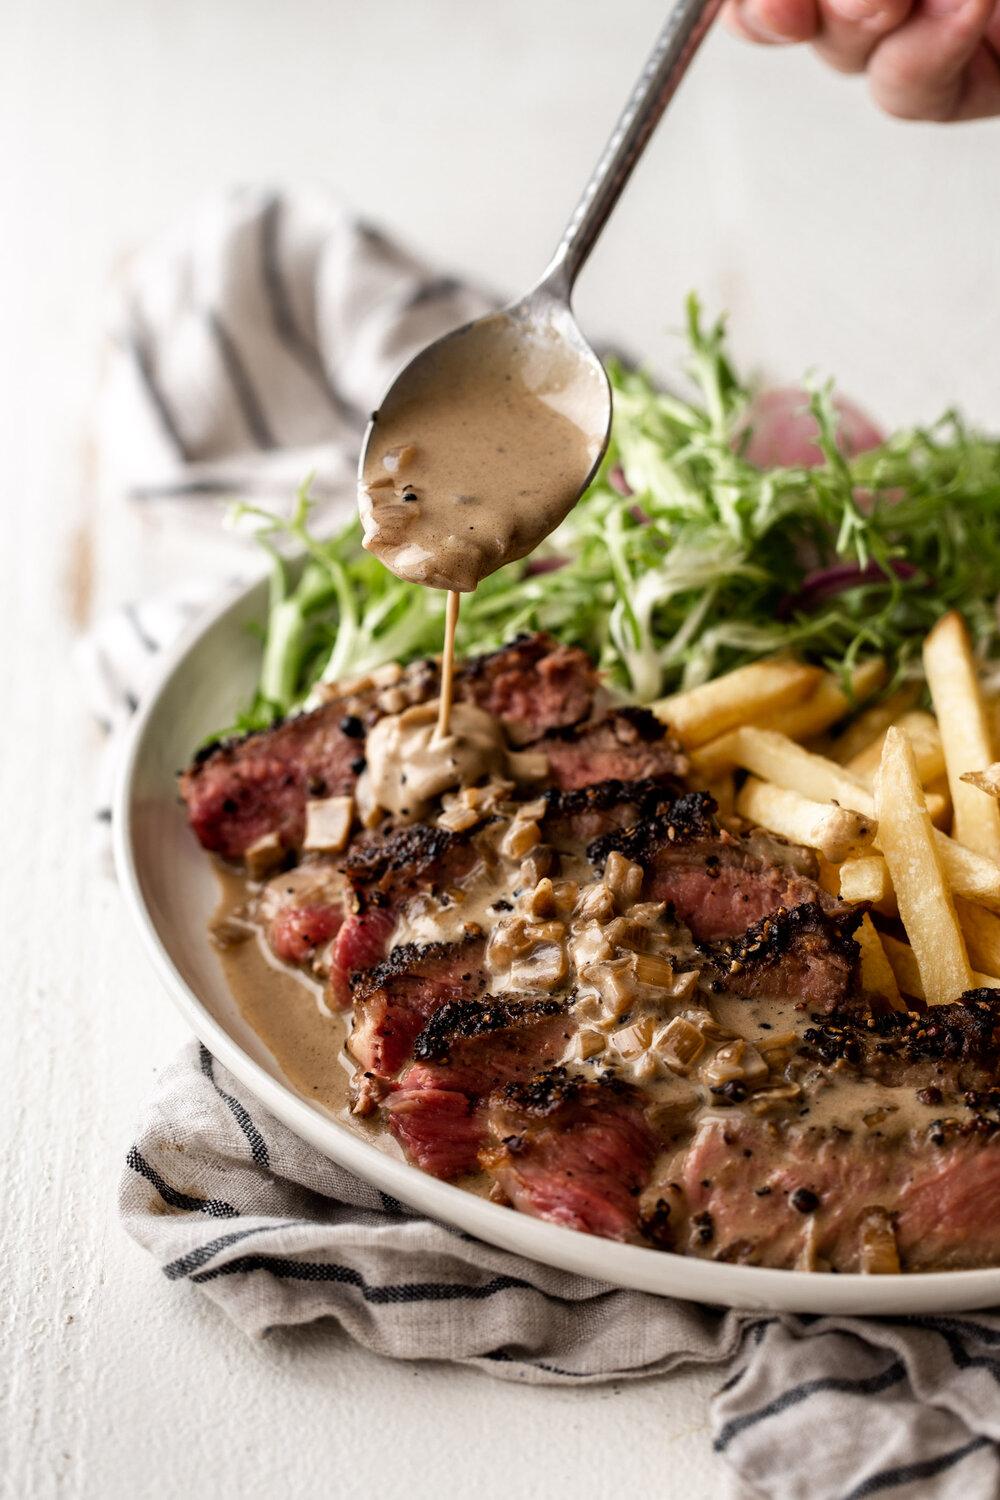 Butter-Basted Steak Au Poivre with Brandy Pan Sauce drizzled over meat